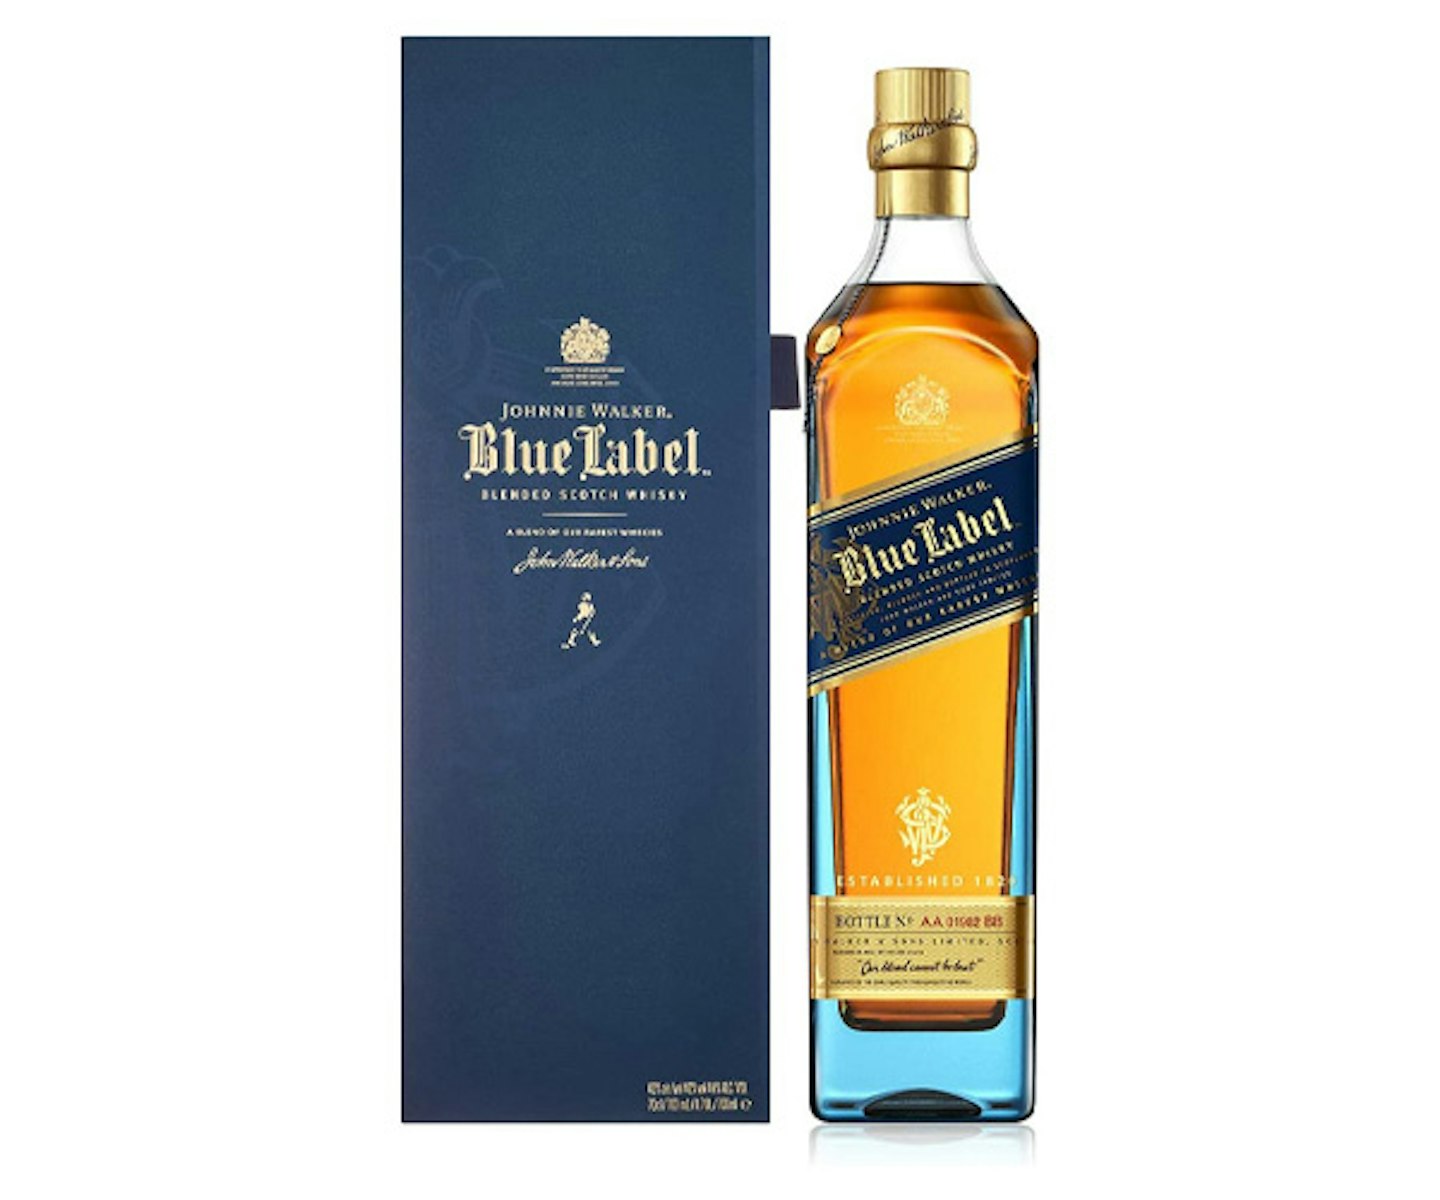 Johnnie Walker Blue Label Blended Scotch Whisky 70cl with Gift Box